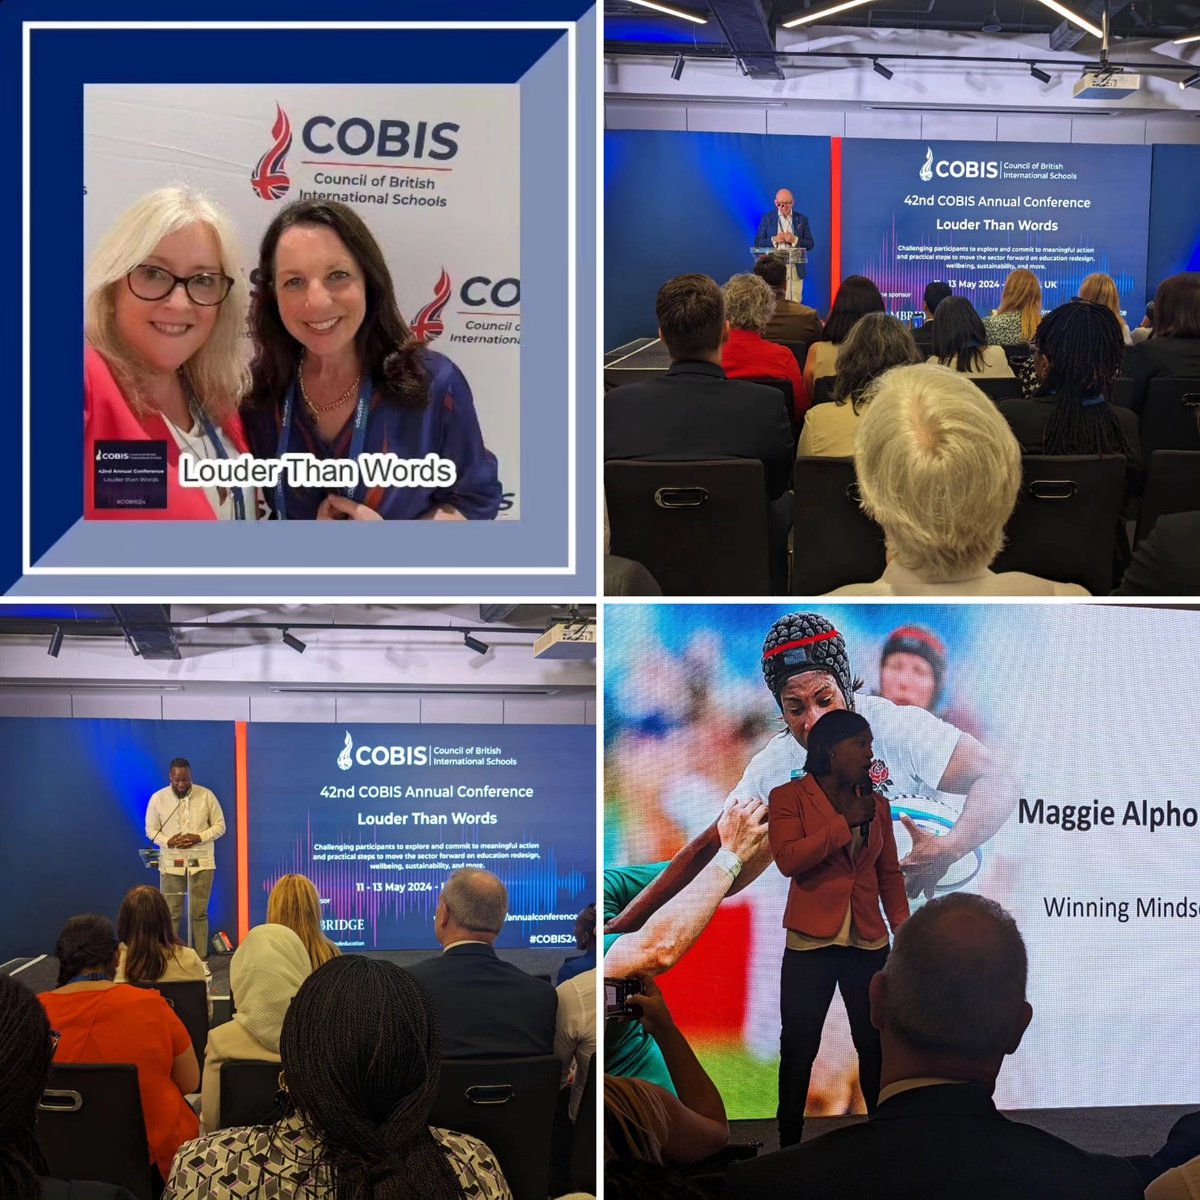 A big thank you to @COBISorg for the inspiring 'Louder than Words' conference. We spent an amazing few days connecting with colleagues and continued our own learning journeys attending some brilliant sessions! We return inspired and ready to share 😊 #cobis24 #lifelonglearning